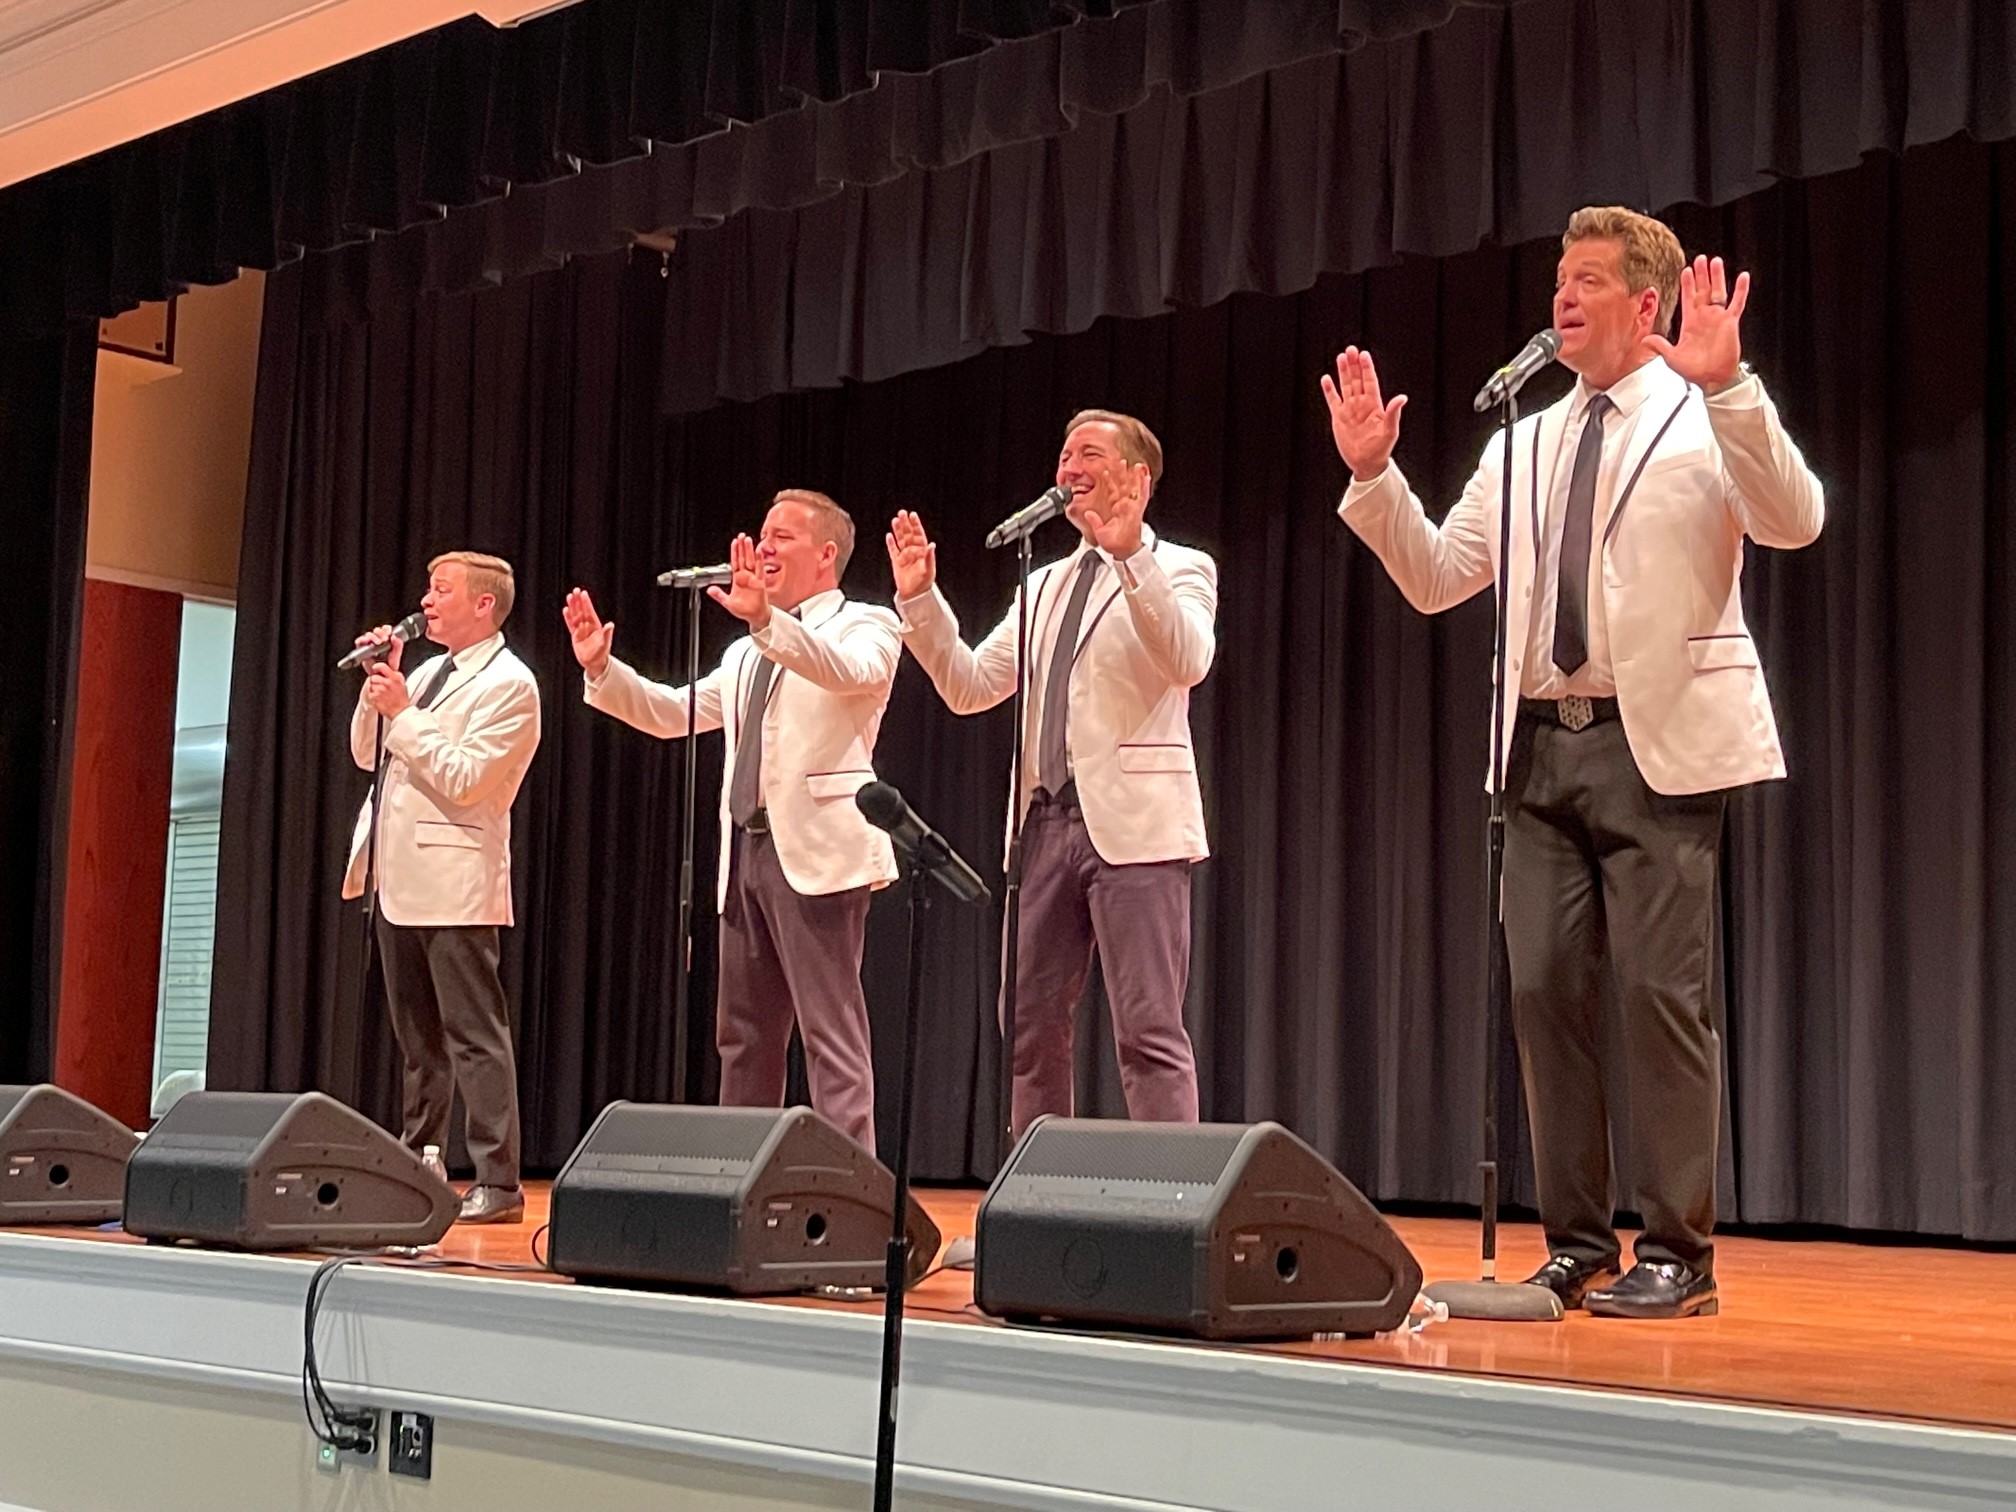 The Atlantic City Boys, performing at Westminster Oaks